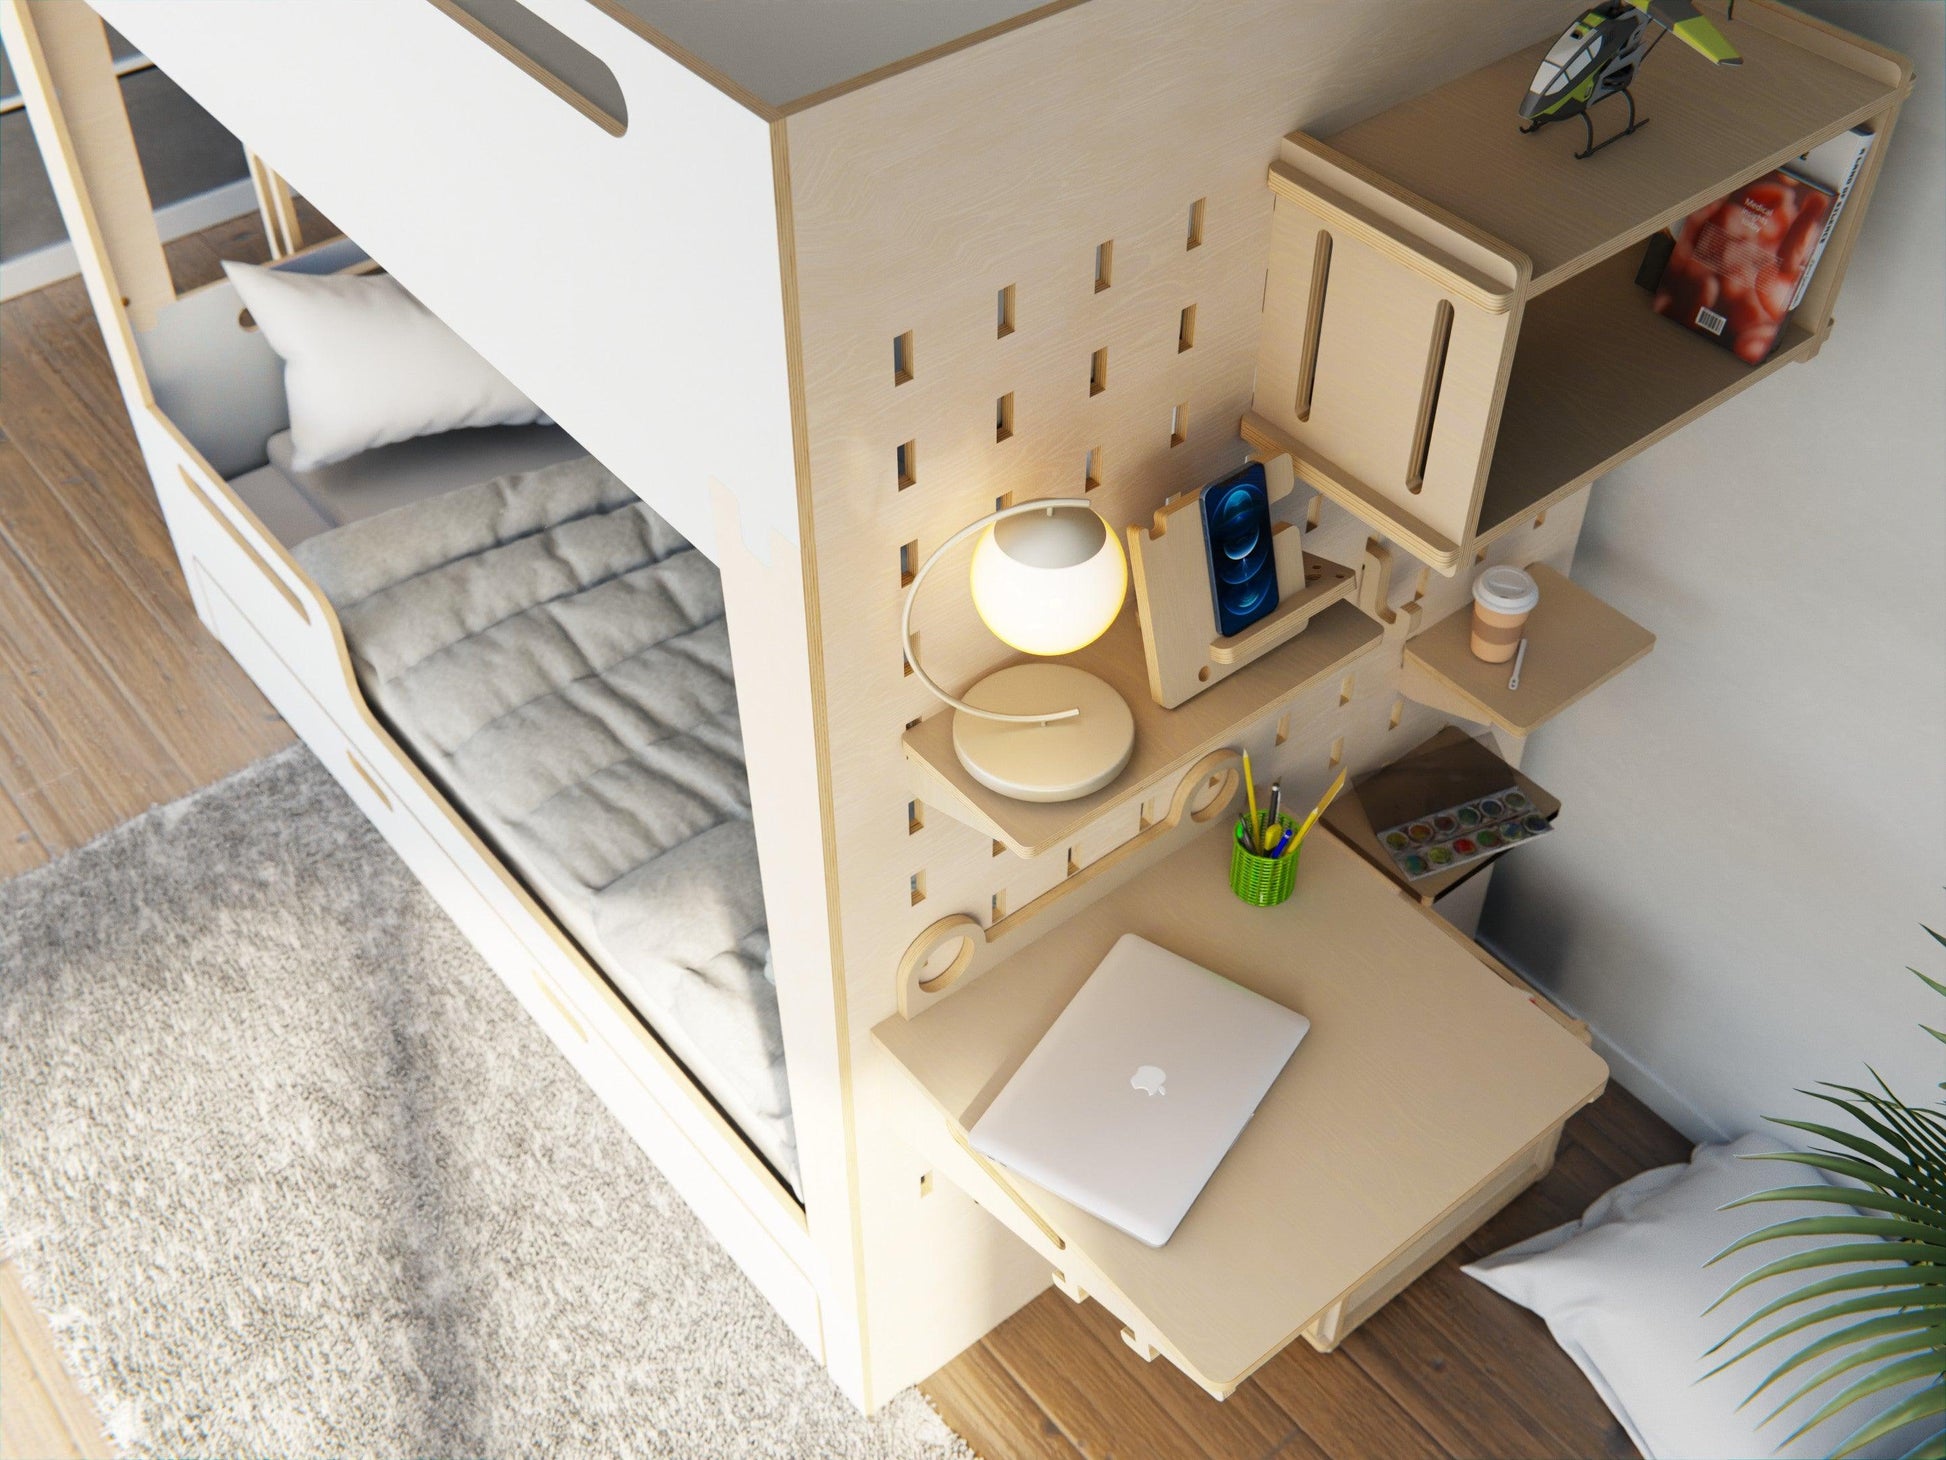 Elevated beds for a modern touch. Space-saving, plywood-made, includes study set and storage. 